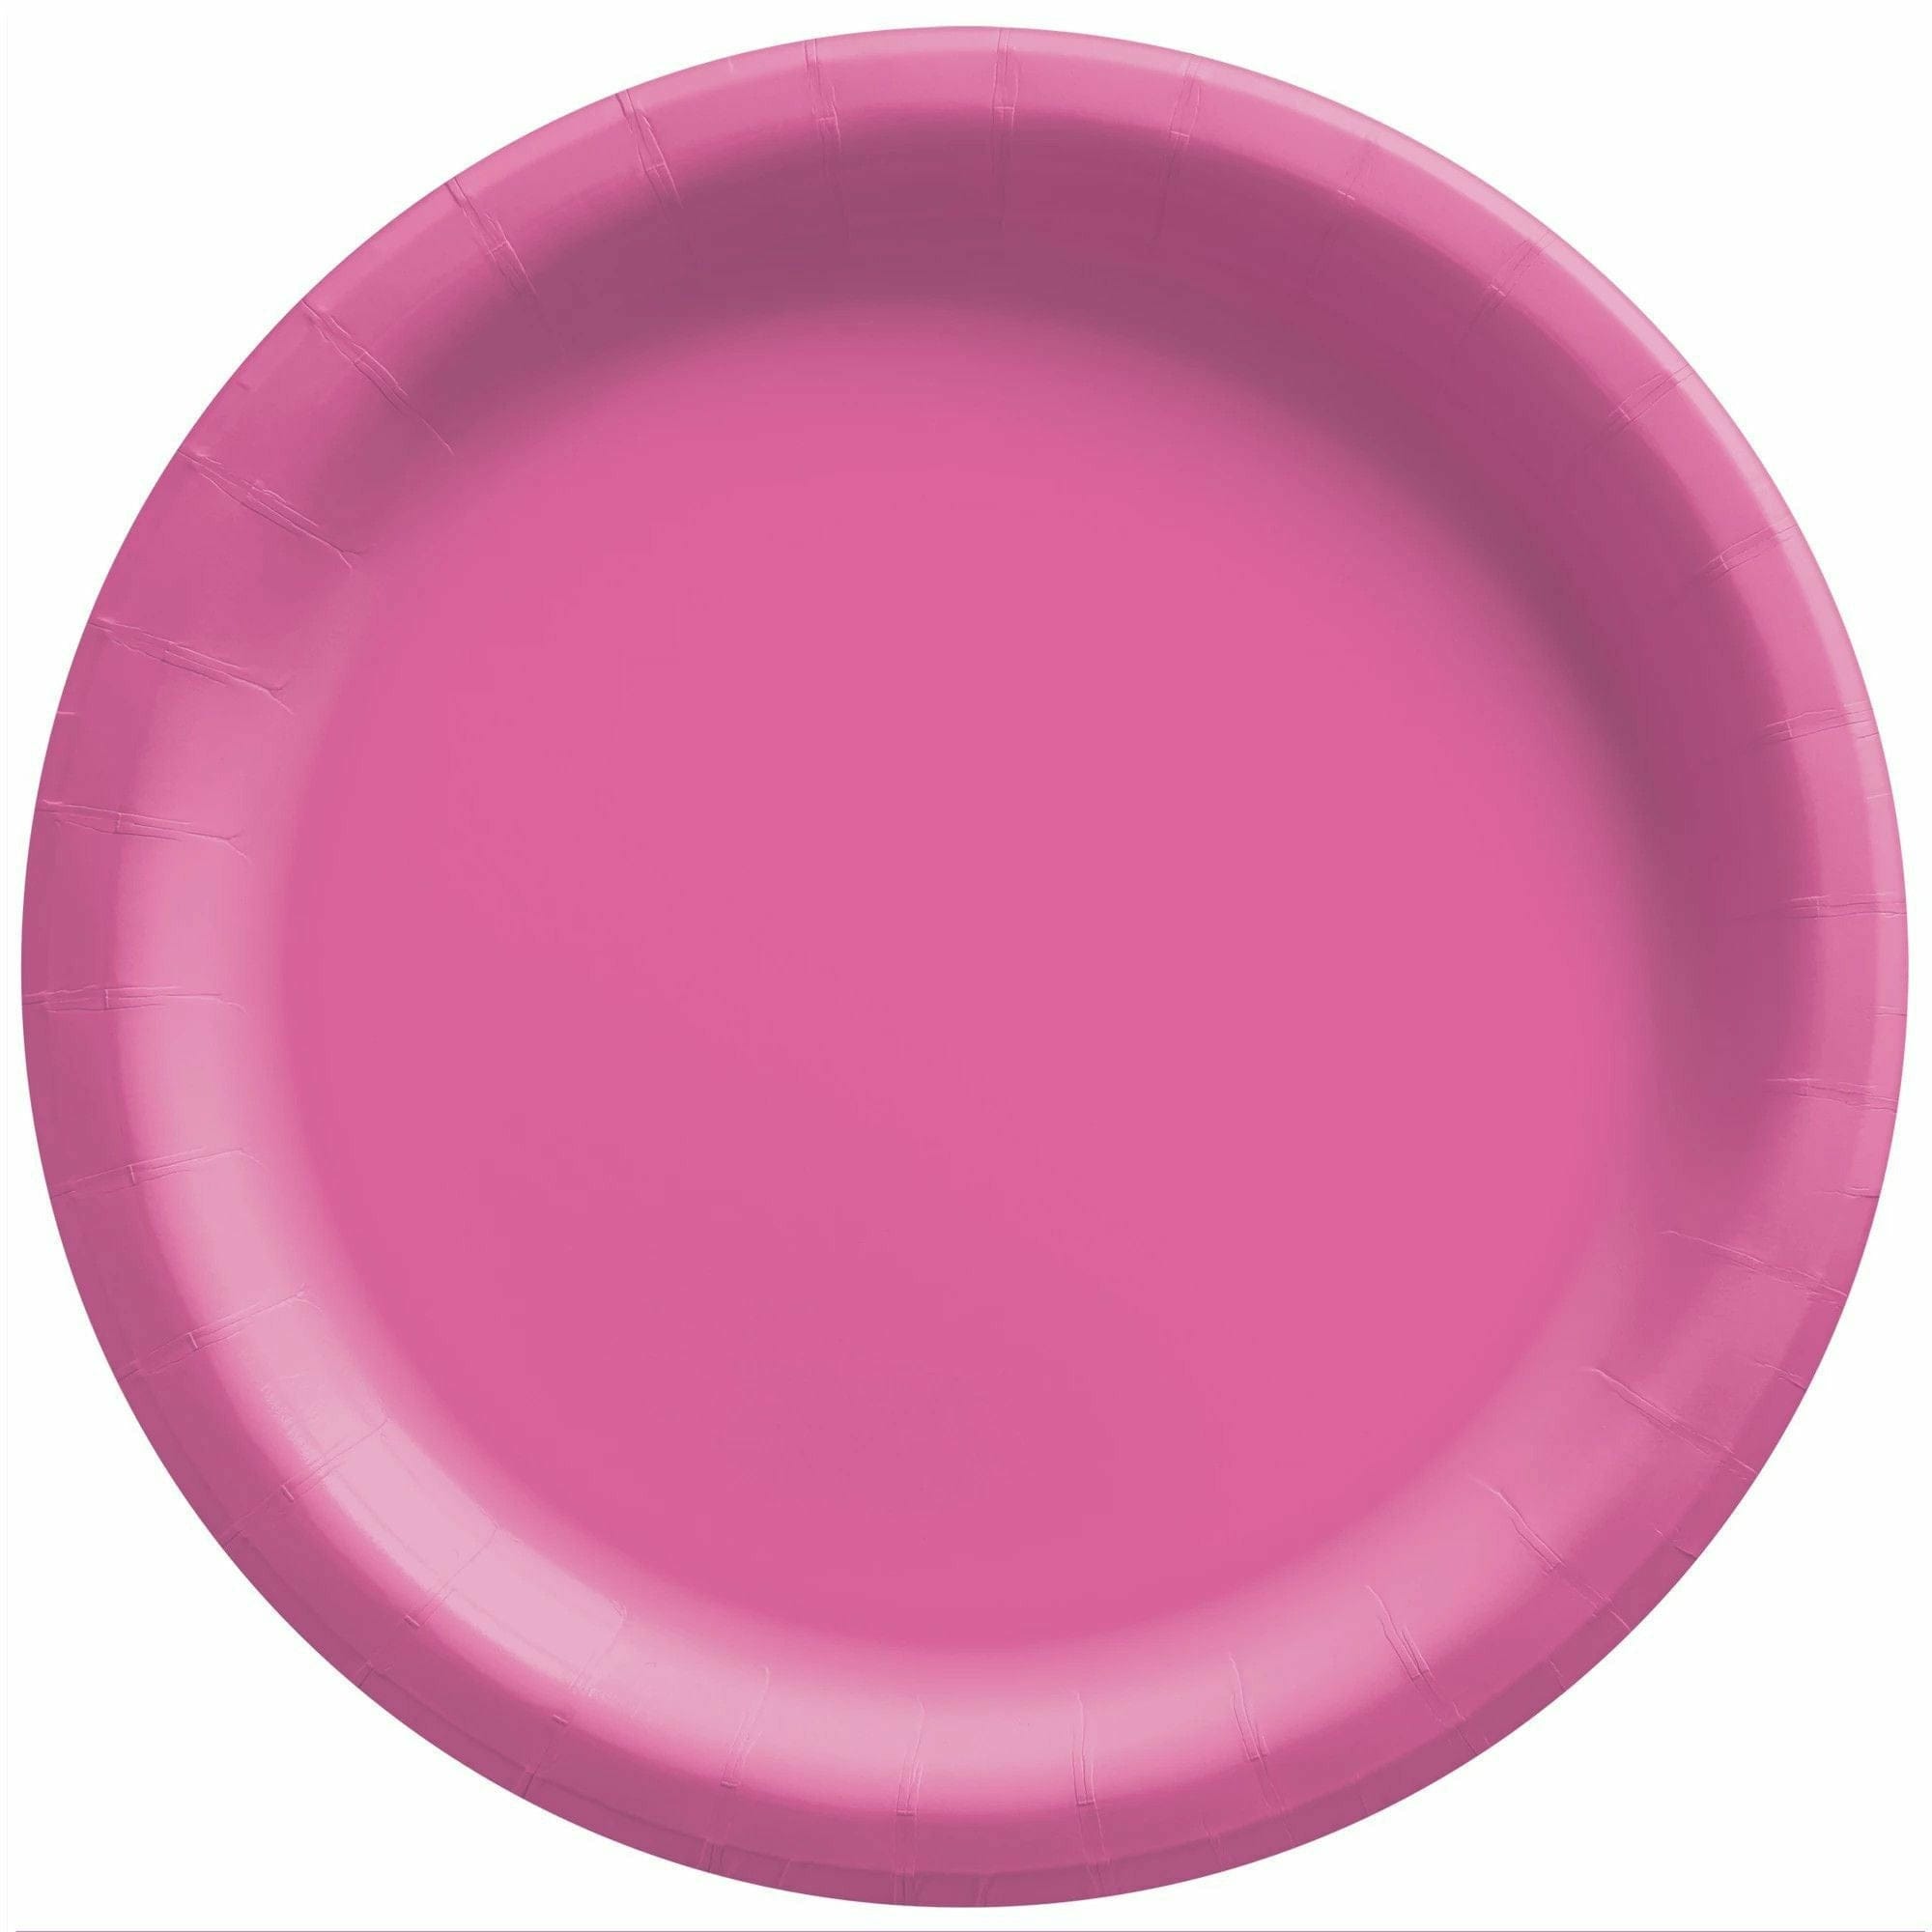 Amscan BASIC Bright Pink - 10" Round Paper Plates, 50 Ct.